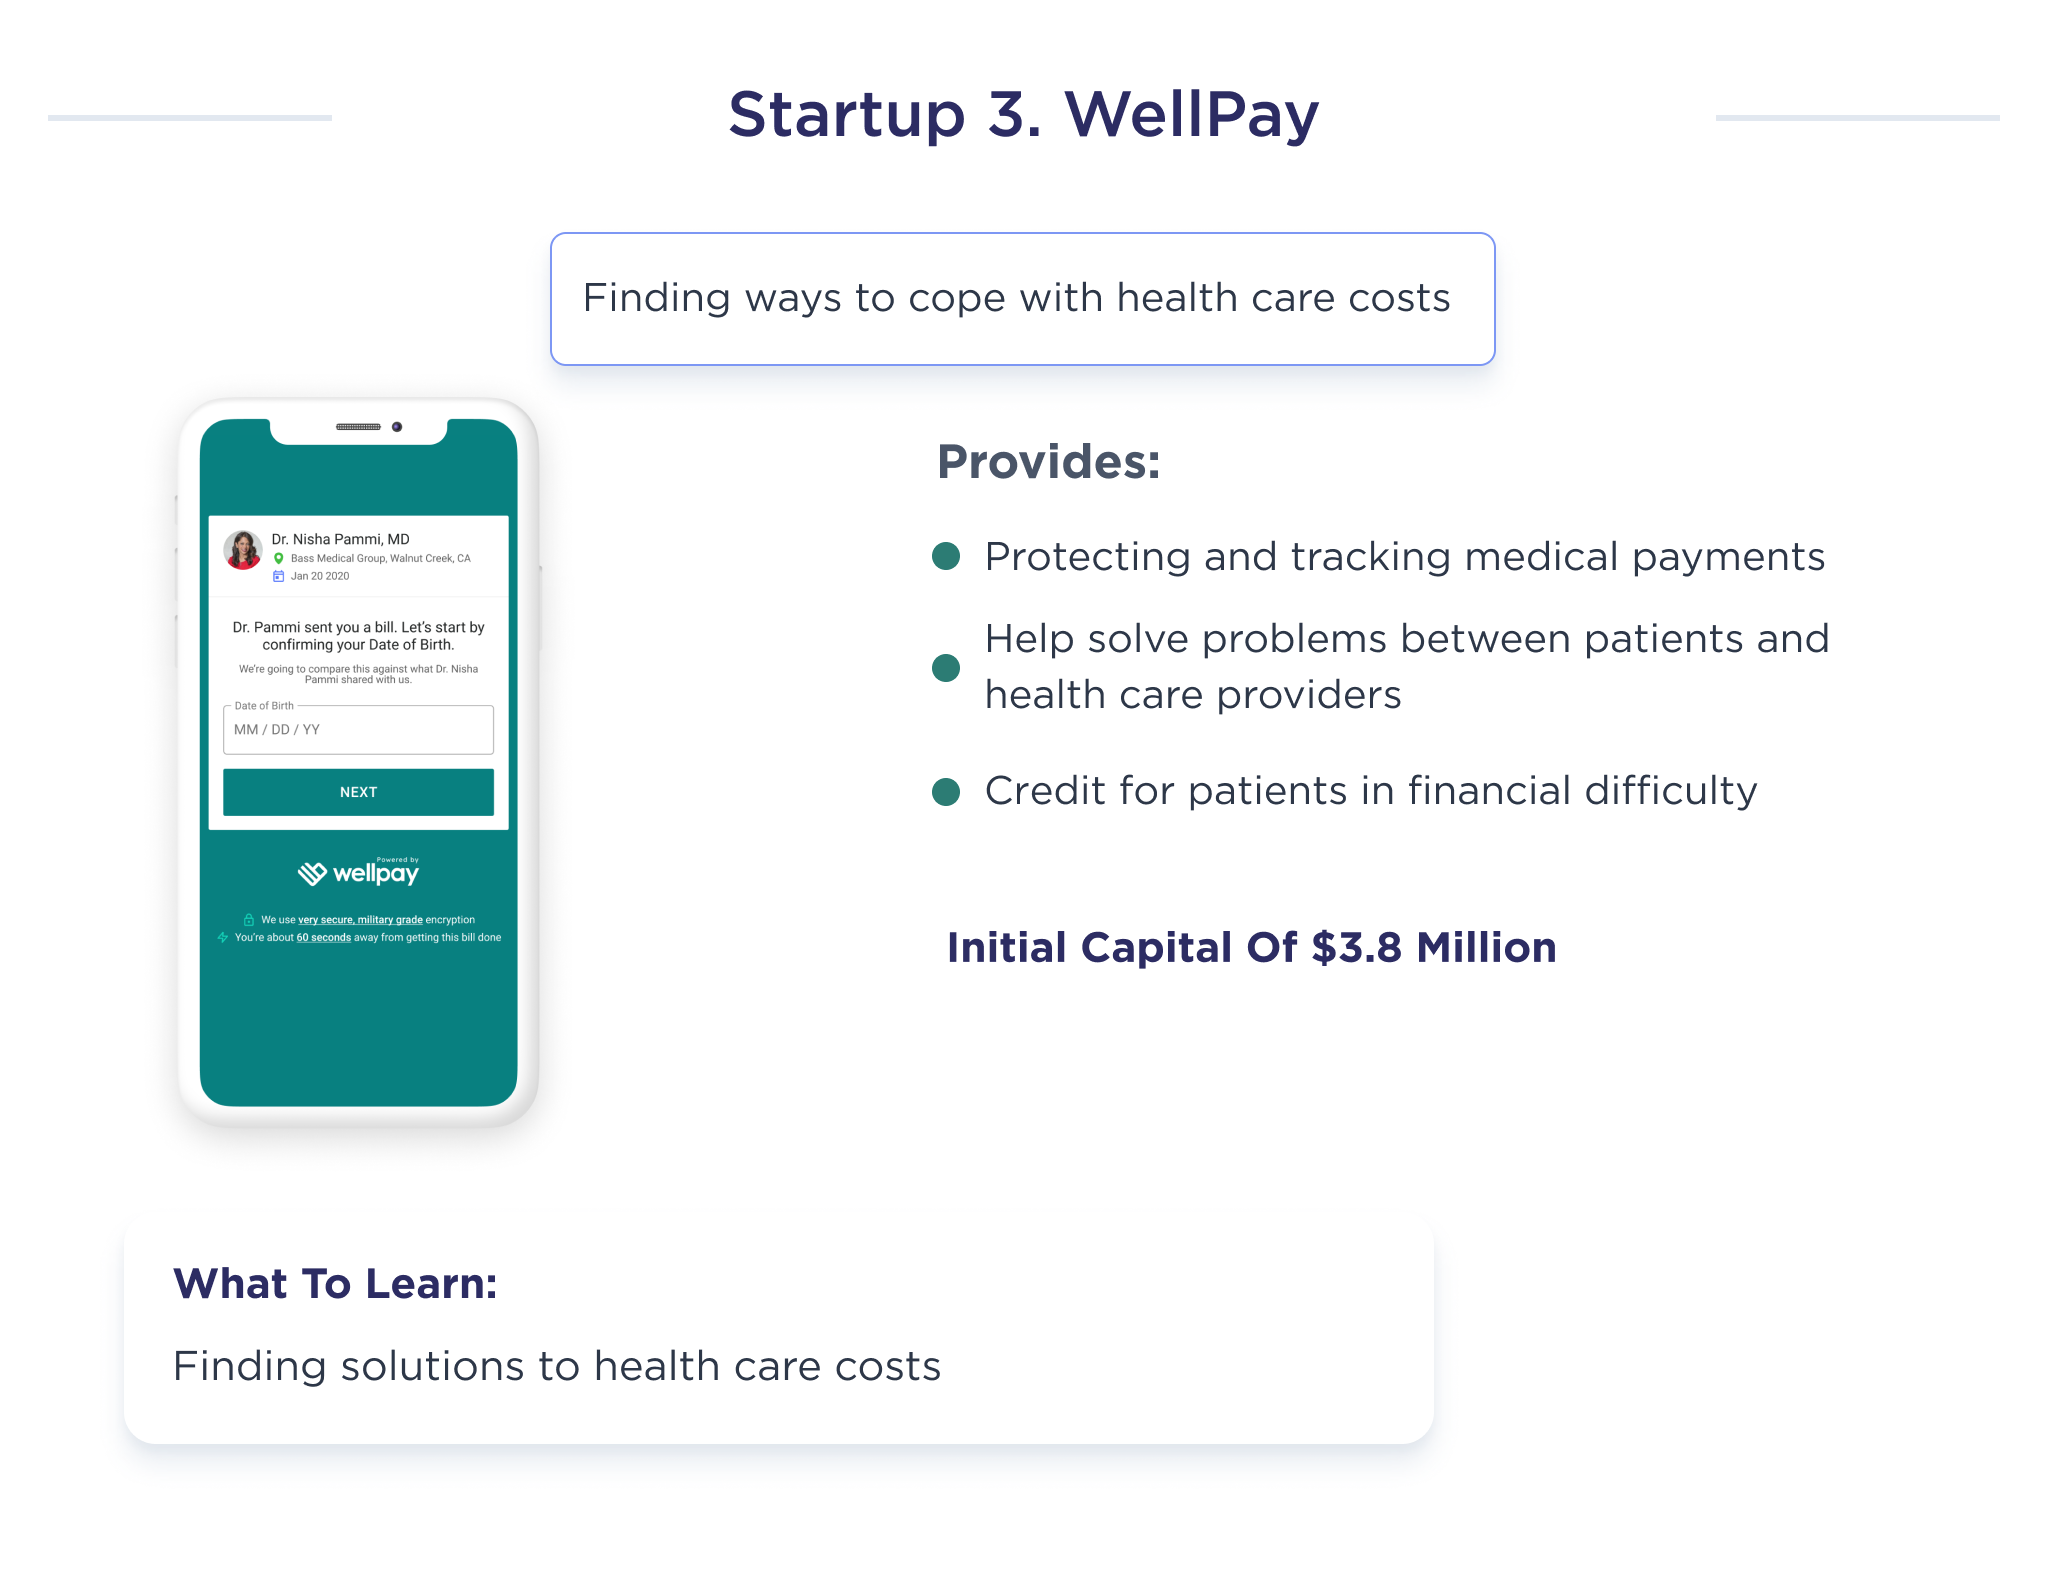 The illustration describes the main core components of WellPay, a startup that helps find solutions to deal with health care costs